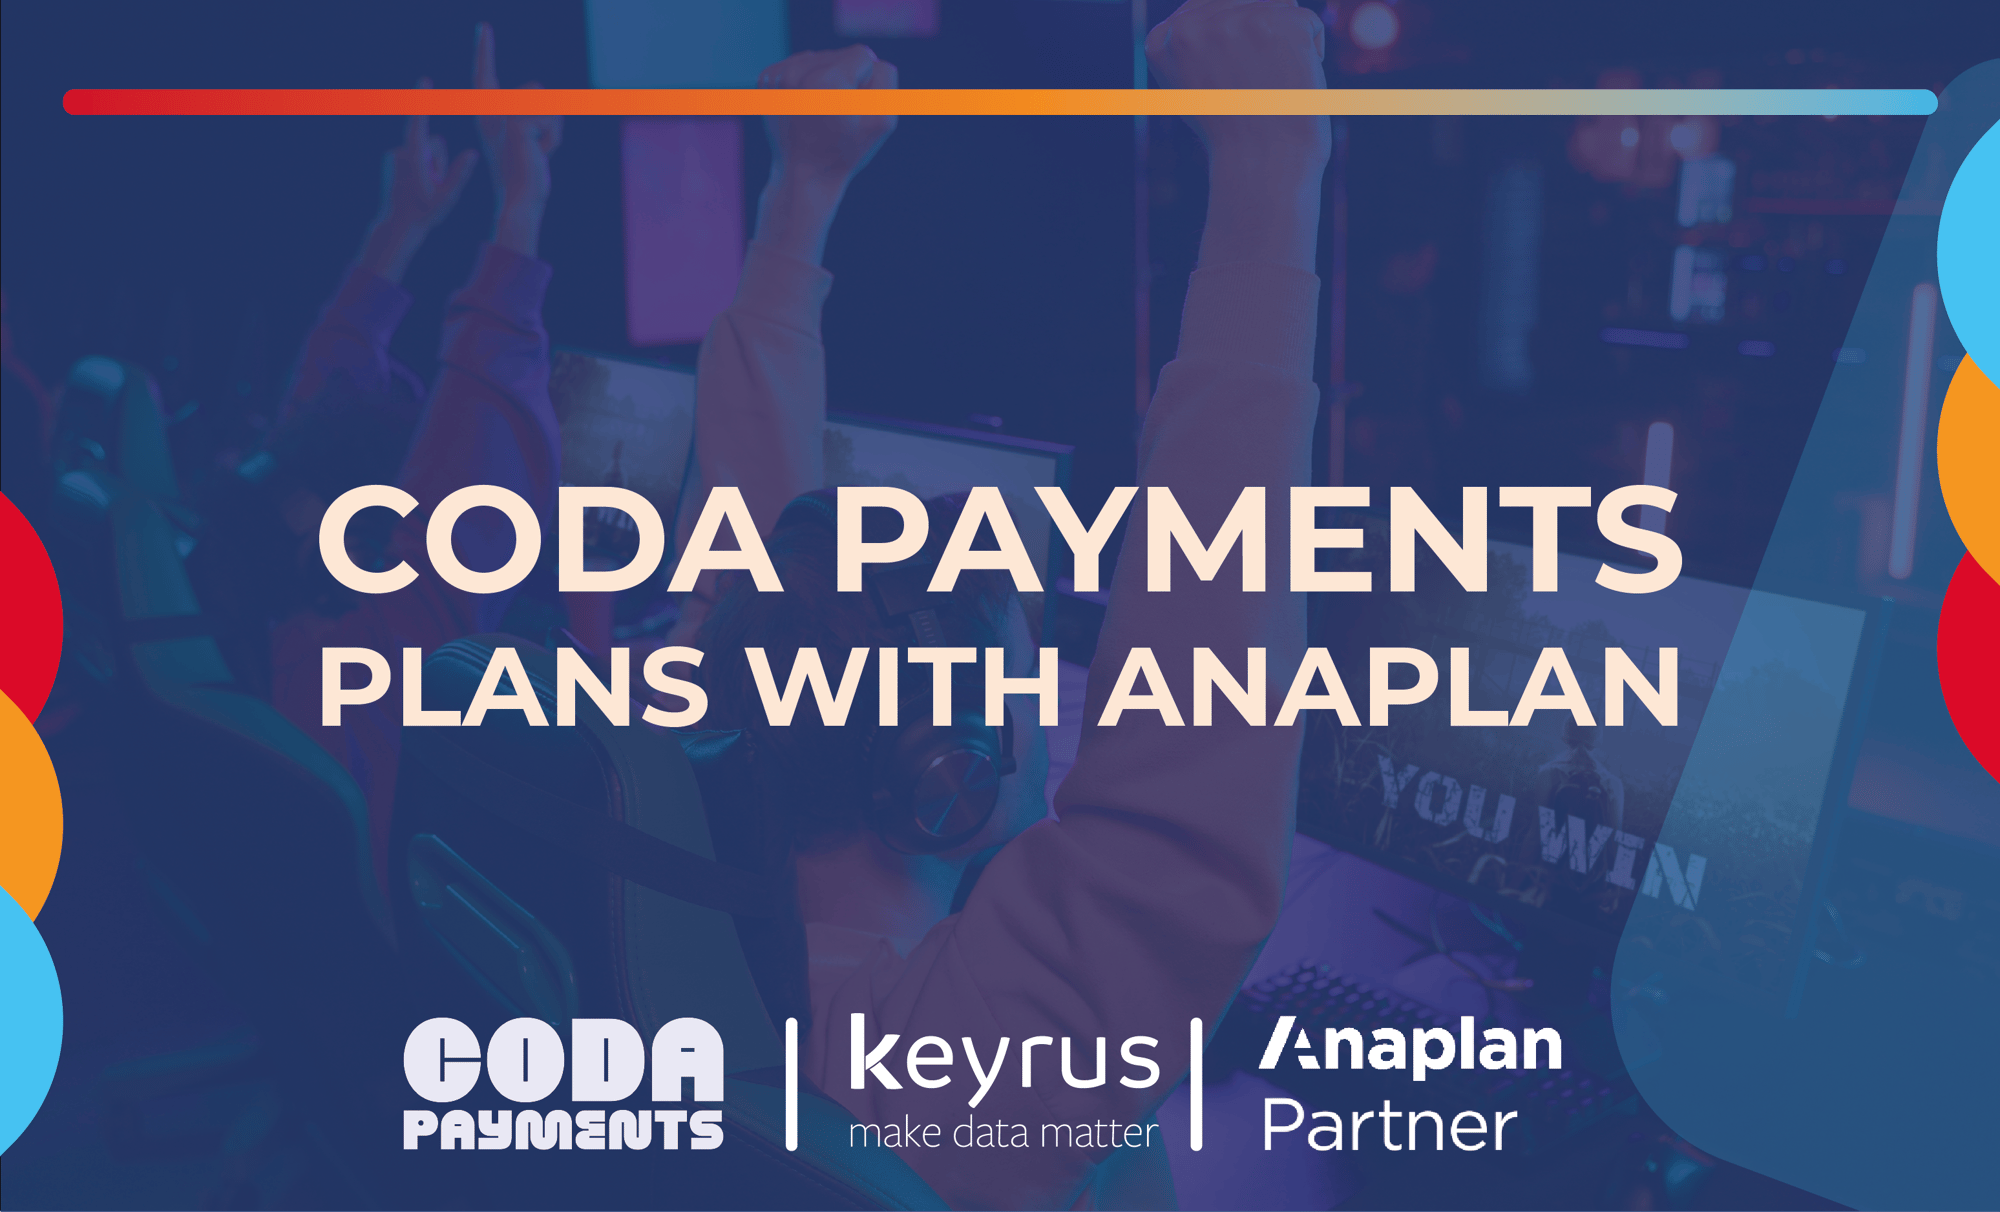 Coda Payments selects Anaplan to improve financial planning through centralized data and deeper collaboration